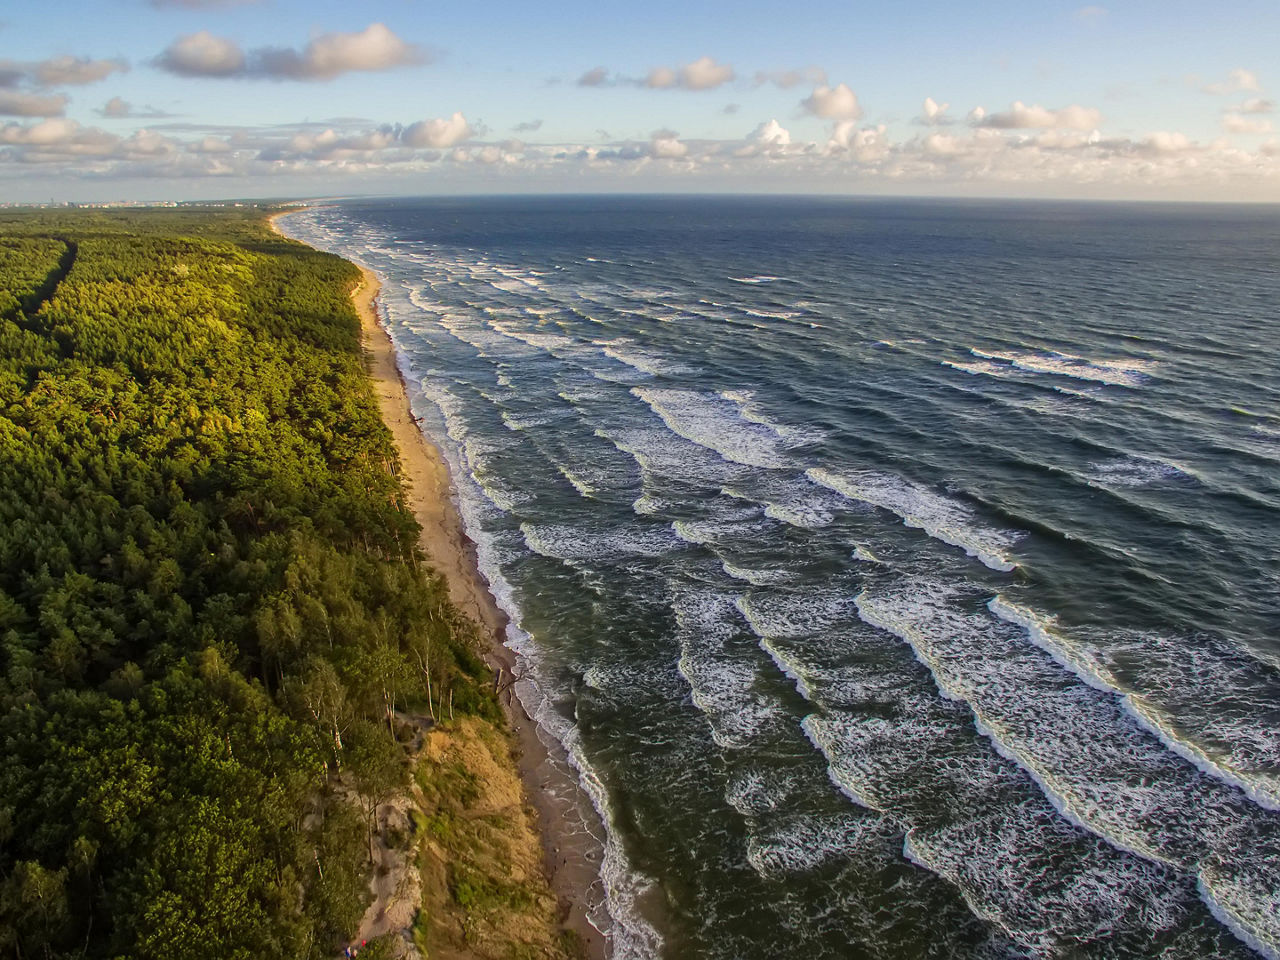 Aerial view of Lithuania's coast on the Baltic Sea